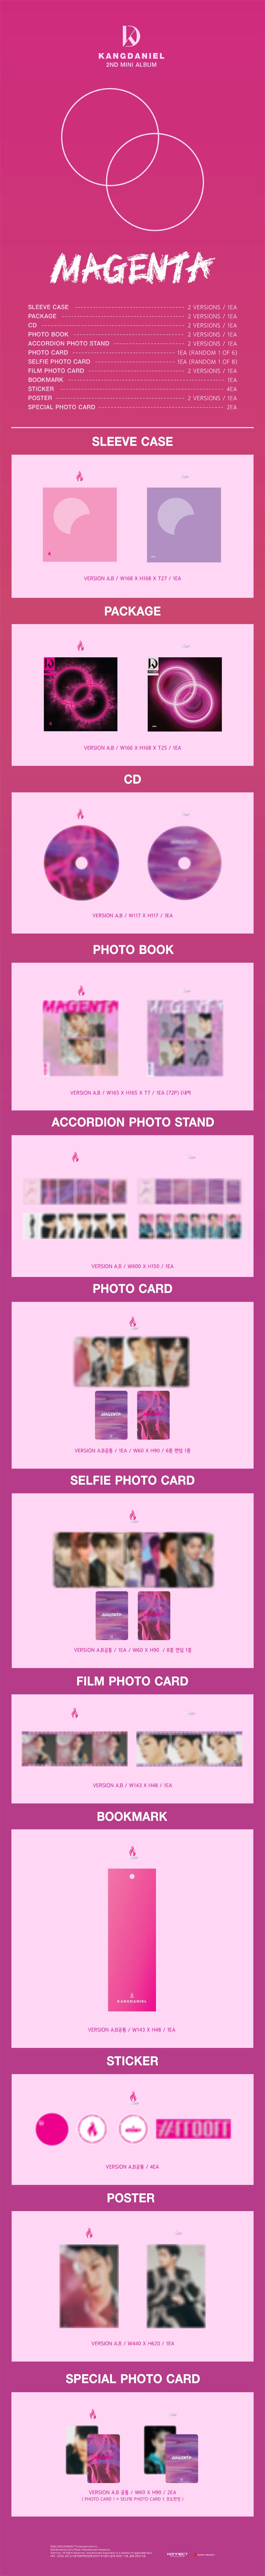 1 CD
1 Photo Book (72 pages)
1 Accordion Photostand
1 Card
1 Selfie
1 Film
1 Bookmark
4 Stickers